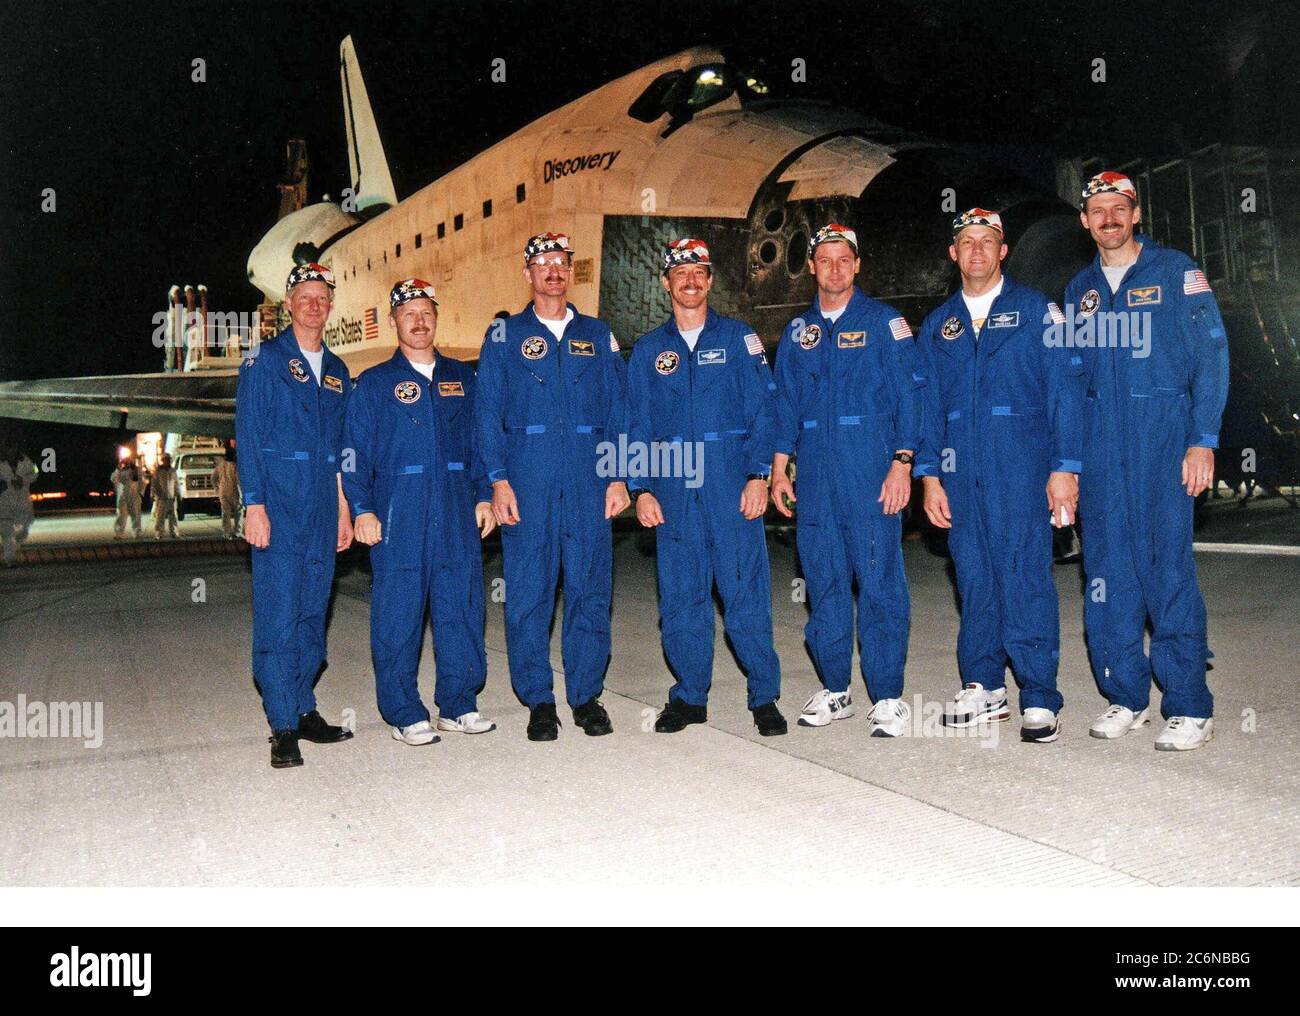 The STS-82 crew stands in front of the Space Shuttle Discovery after landing at KSC's Shuttle Landing Facility on Runway 15 to conclude a 10-day mission to service the orbiting Hubble Space Telescope (HST). Crew members are (from left to right) Mission Specialist Steven A. Hawley, Mission Commander Kenneth D. Bowersox, Mission Specialist Joseph R. 'Joe' Tanner, Pilot Scott J. 'Doc' Horowitz, Mission Specialist Gregory J. Harbaugh, Payload Commander Mark C. Lee and Mission Specialist Steven L. Smith. STS-82 is the ninth Shuttle nighttime landing, and the fourth nighttime landing at KSC. Stock Photo